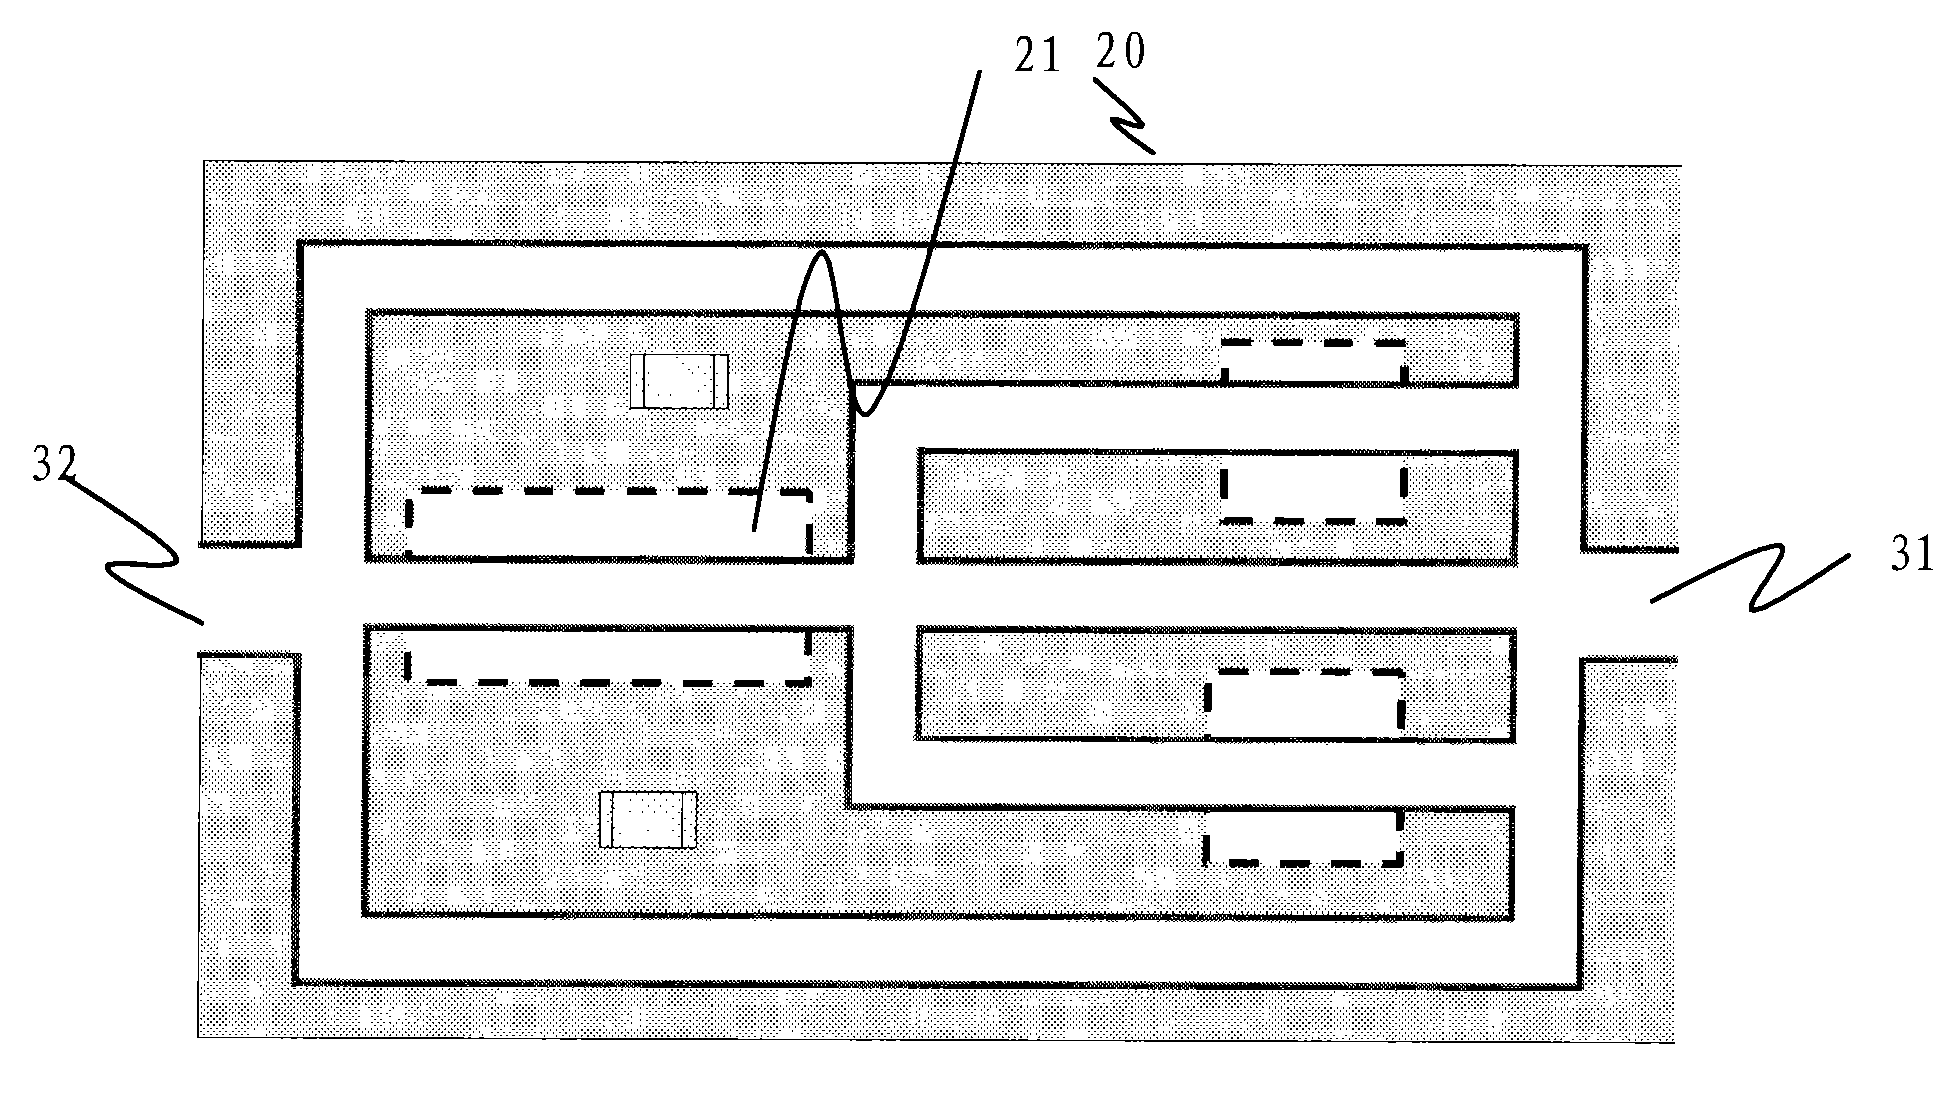 Embedded circuit board radiating device and processing method of element